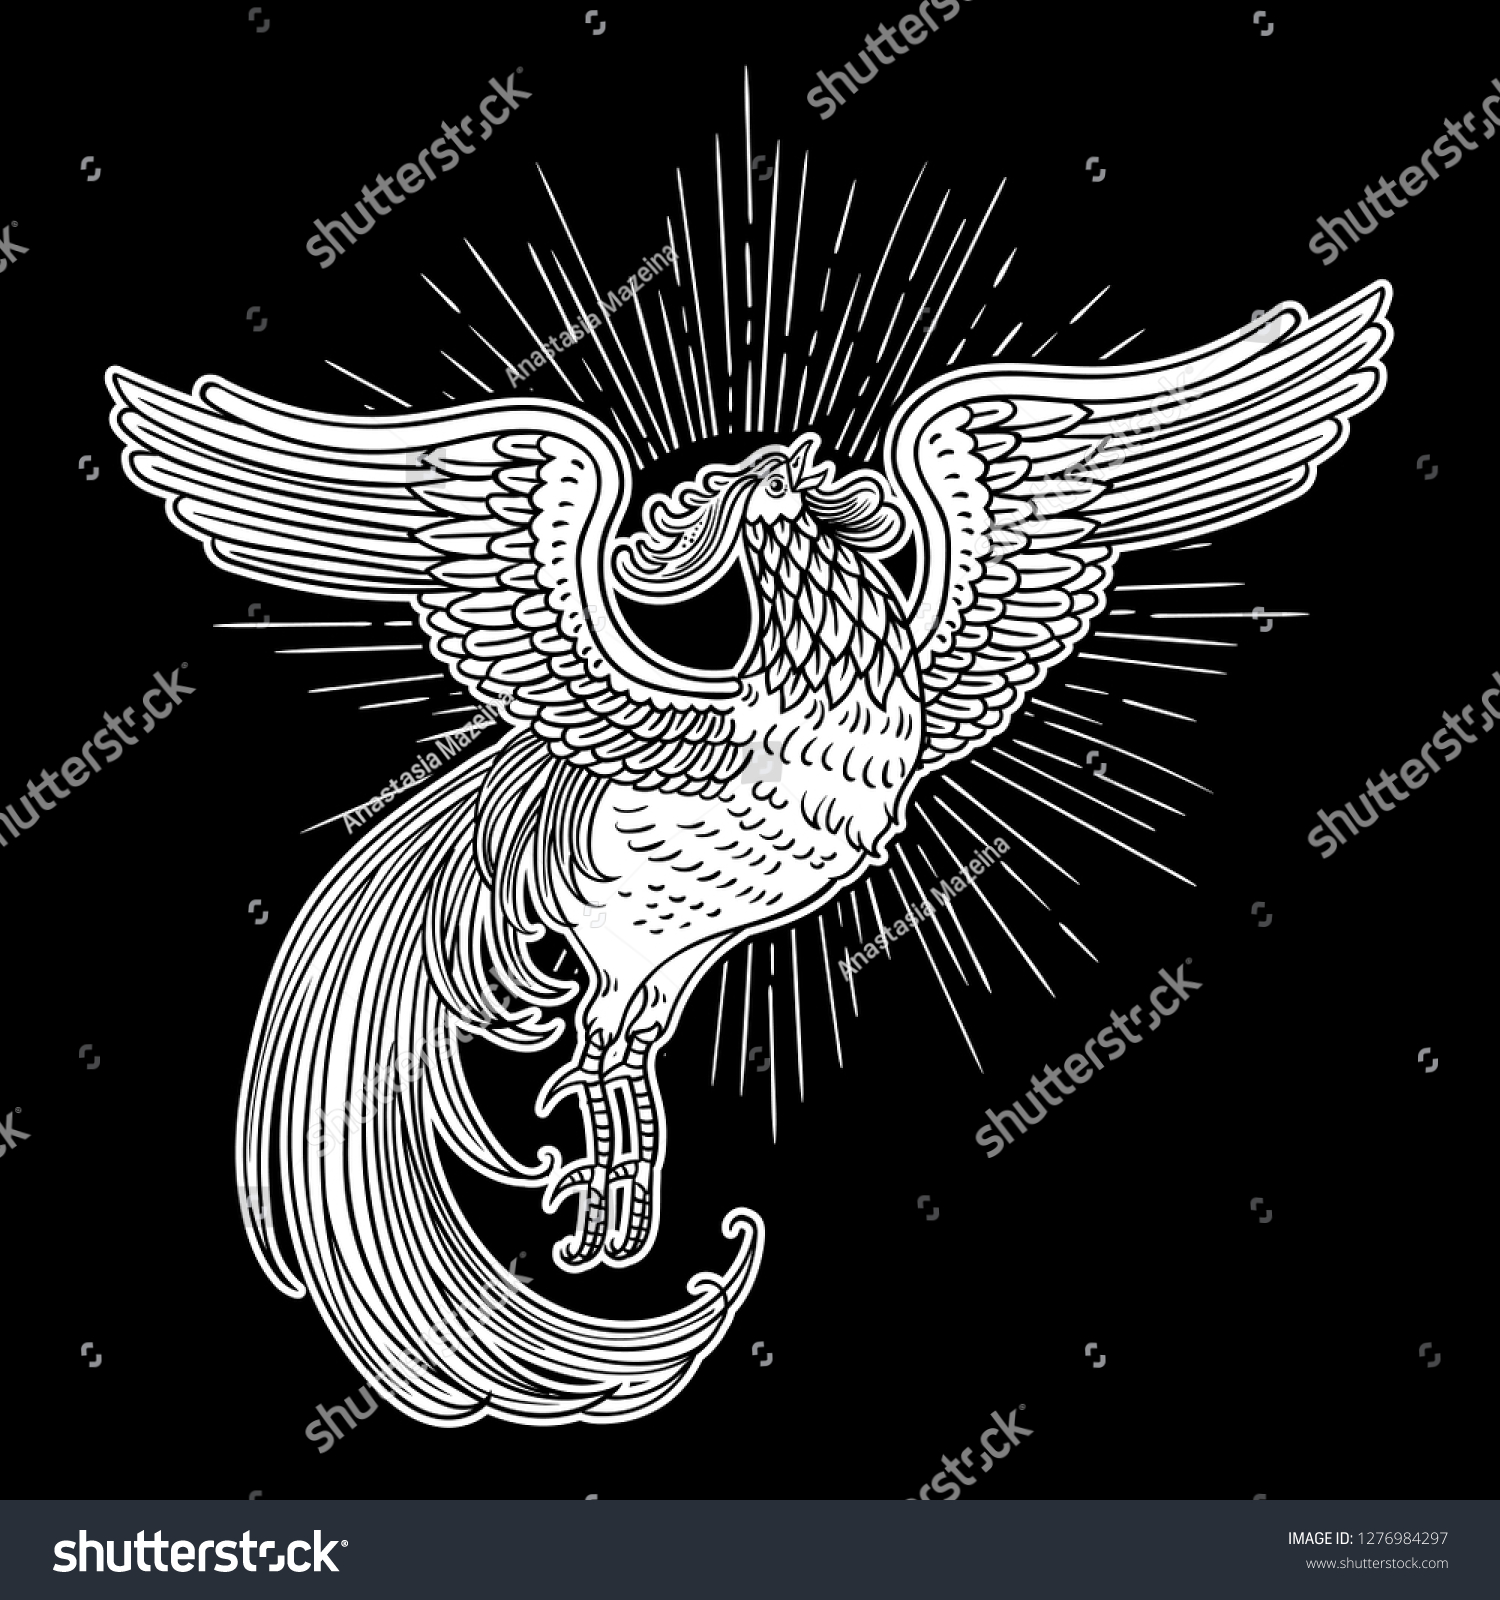 Hand Drawn Illustration Golden Rooster Russian Stock Vector Royalty Free